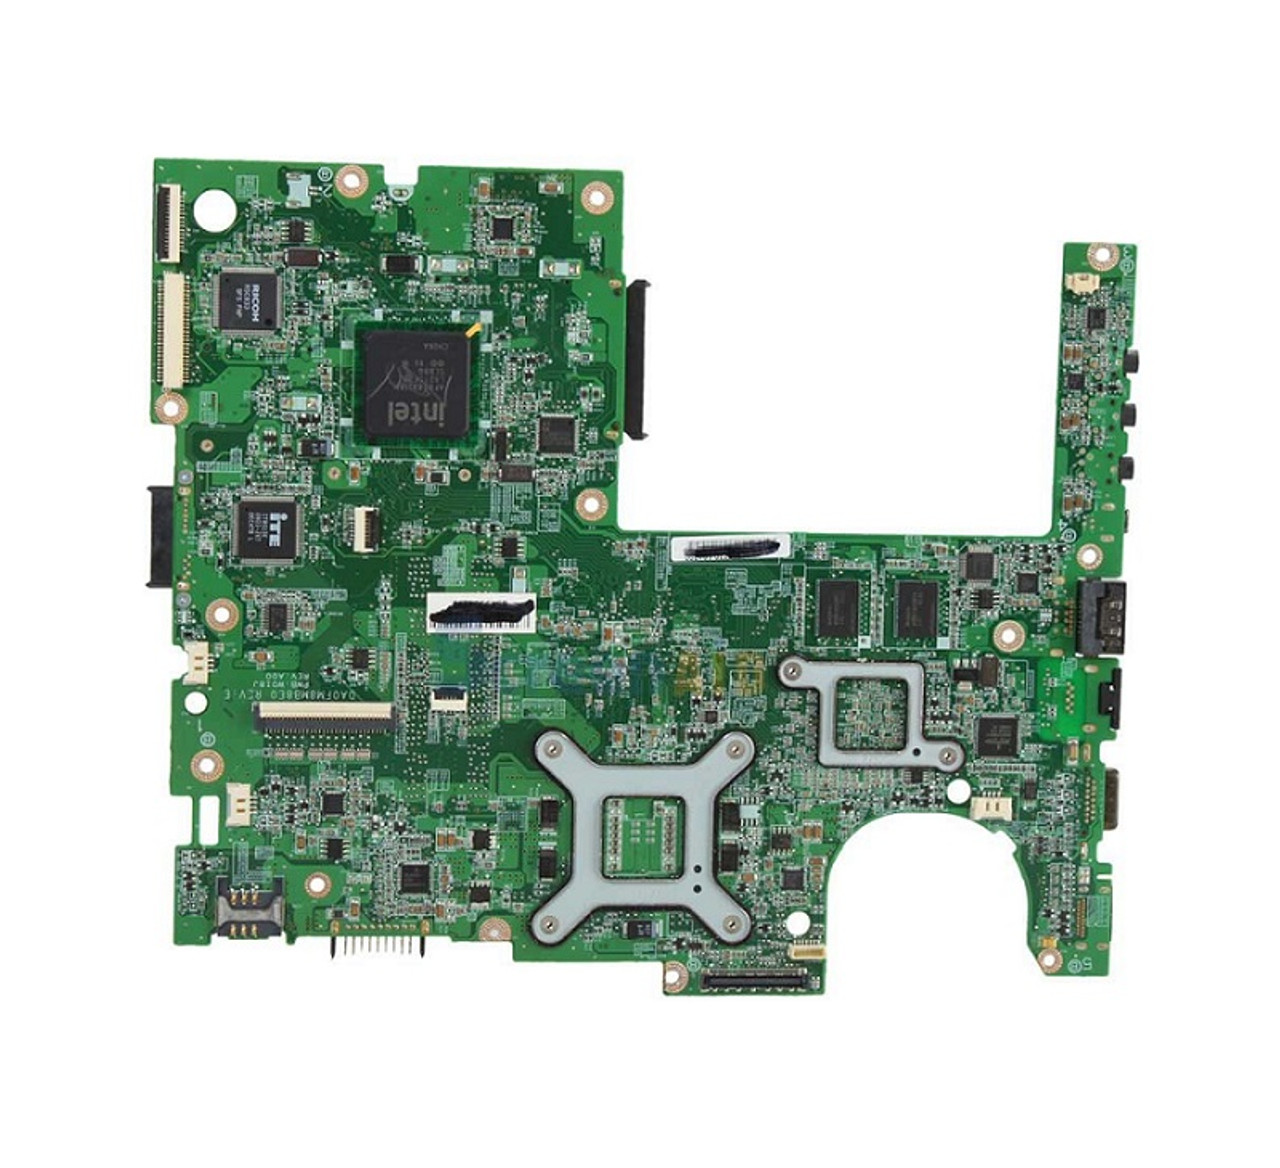 KG525 - Dell System Board for Inspiron 640M/E1405 Laptop